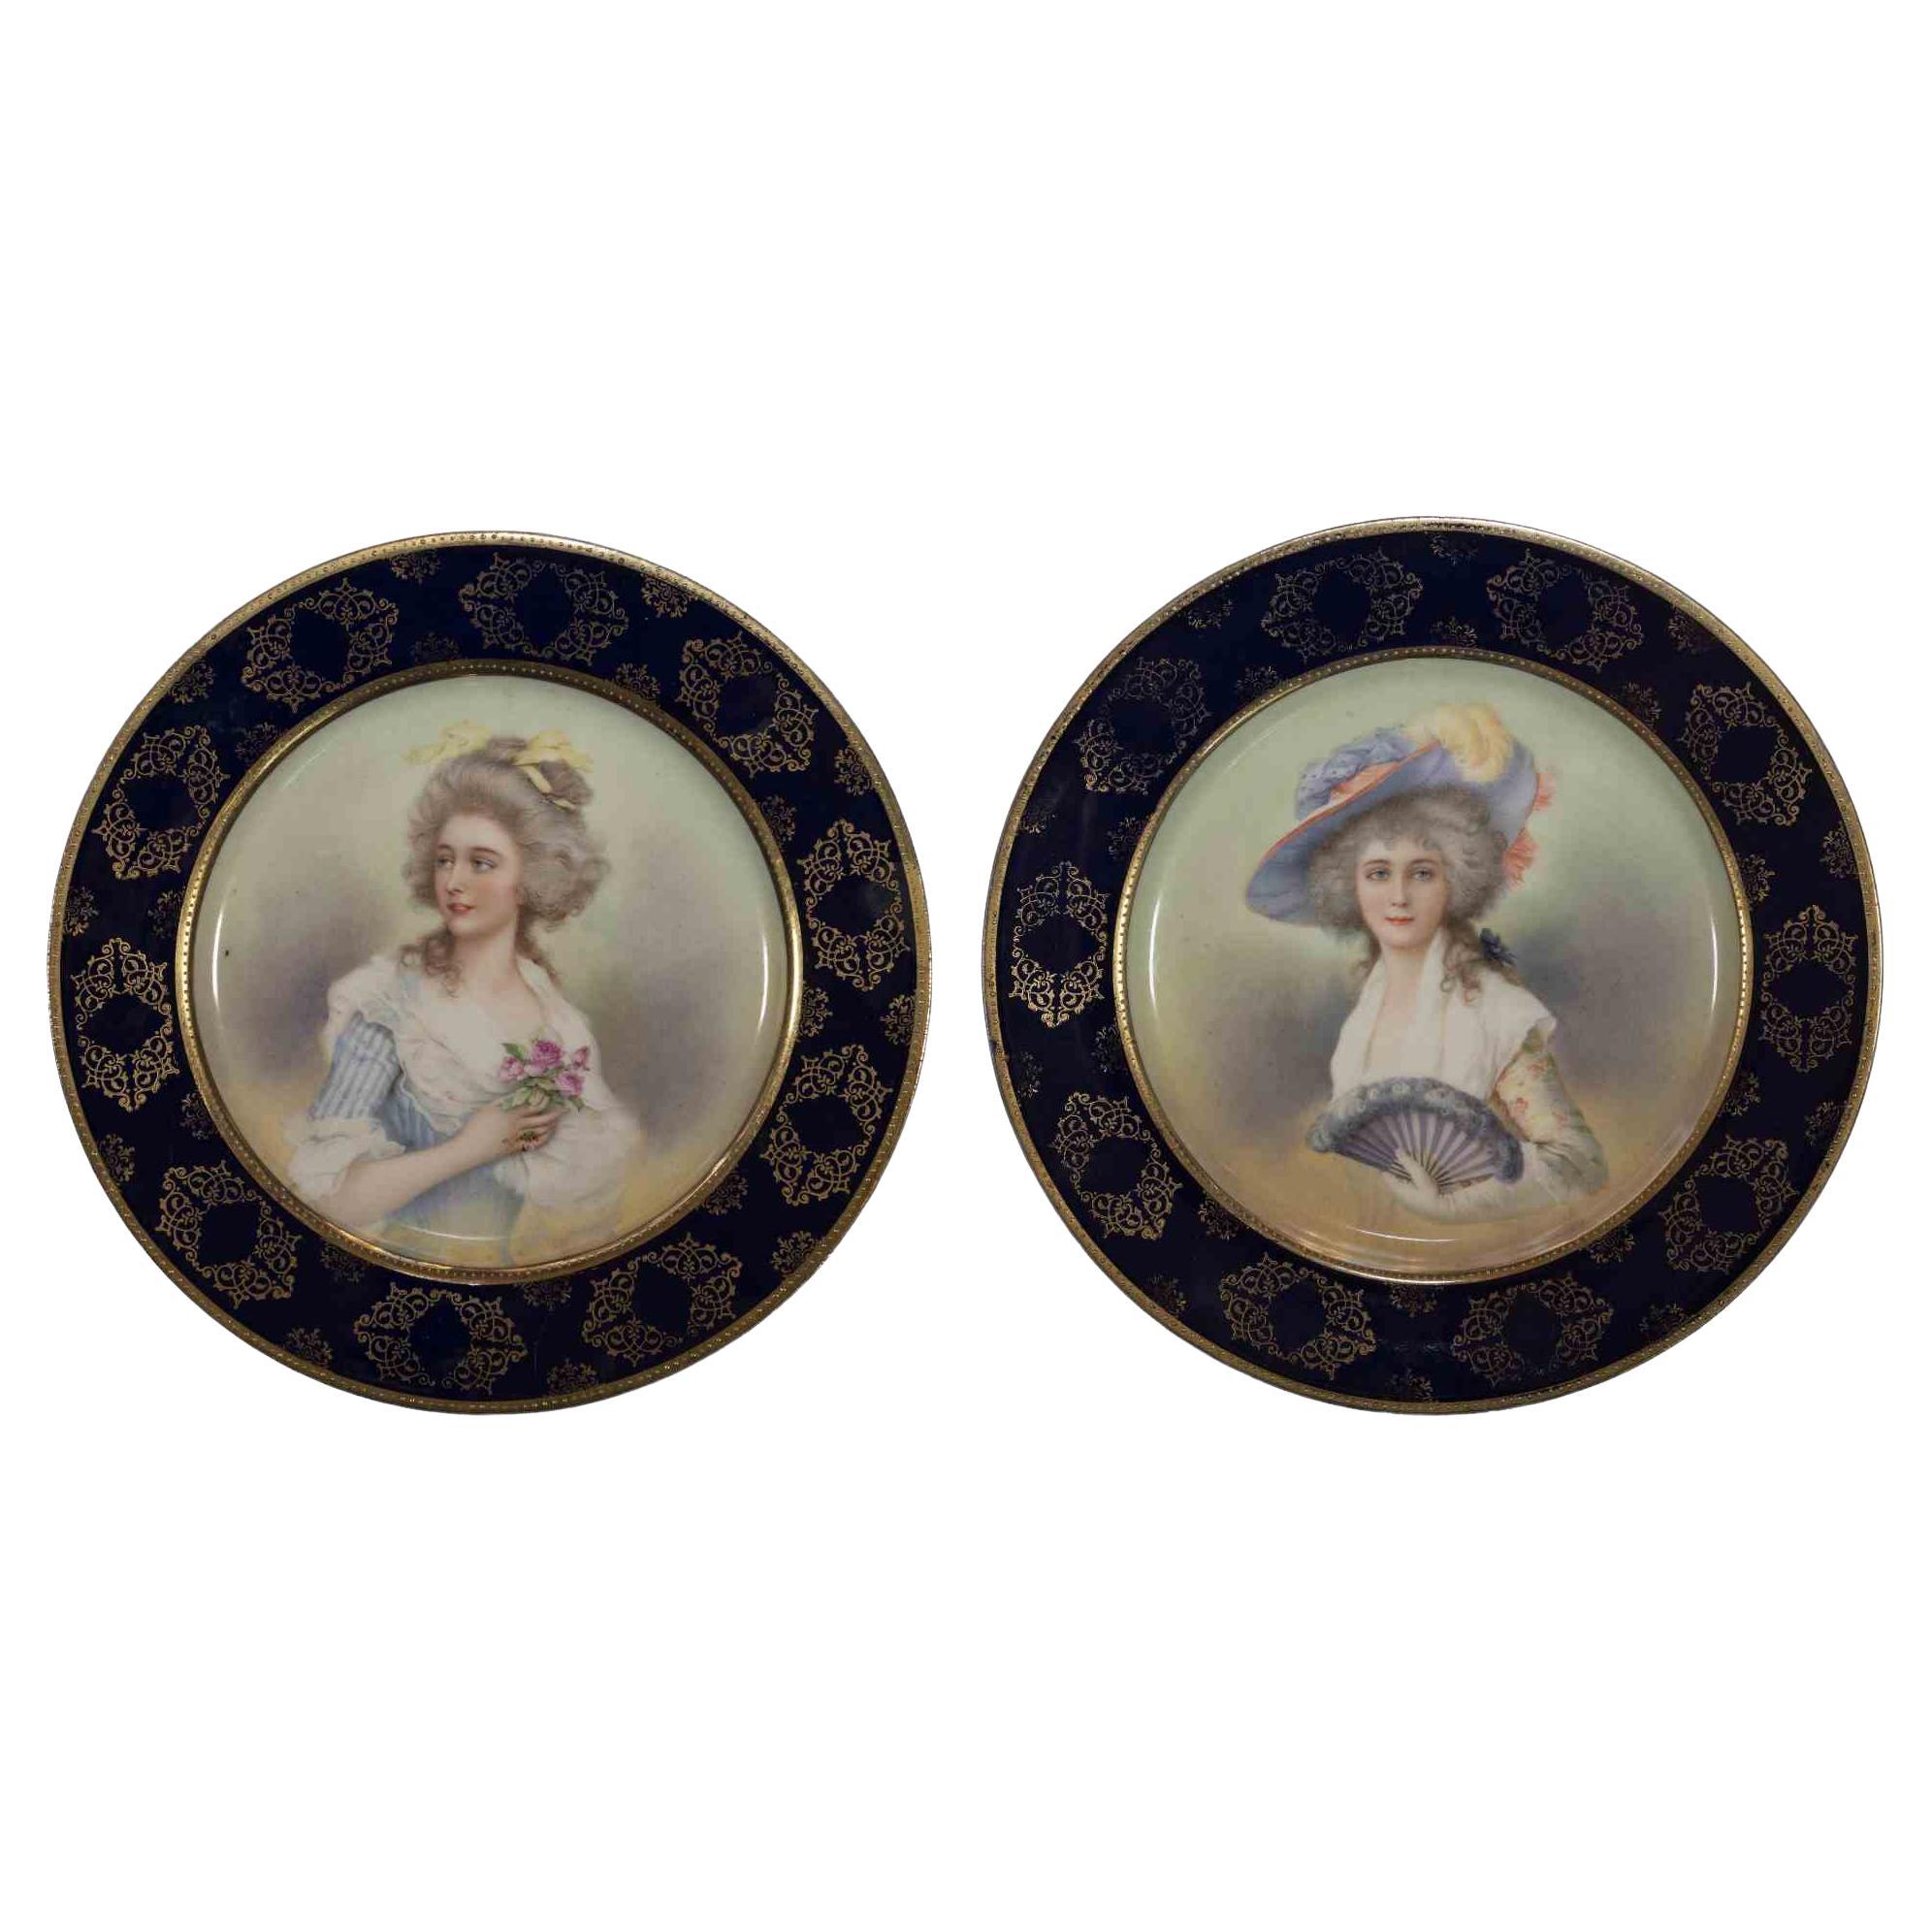 Pair of Decorated Plates, Early 20th Century